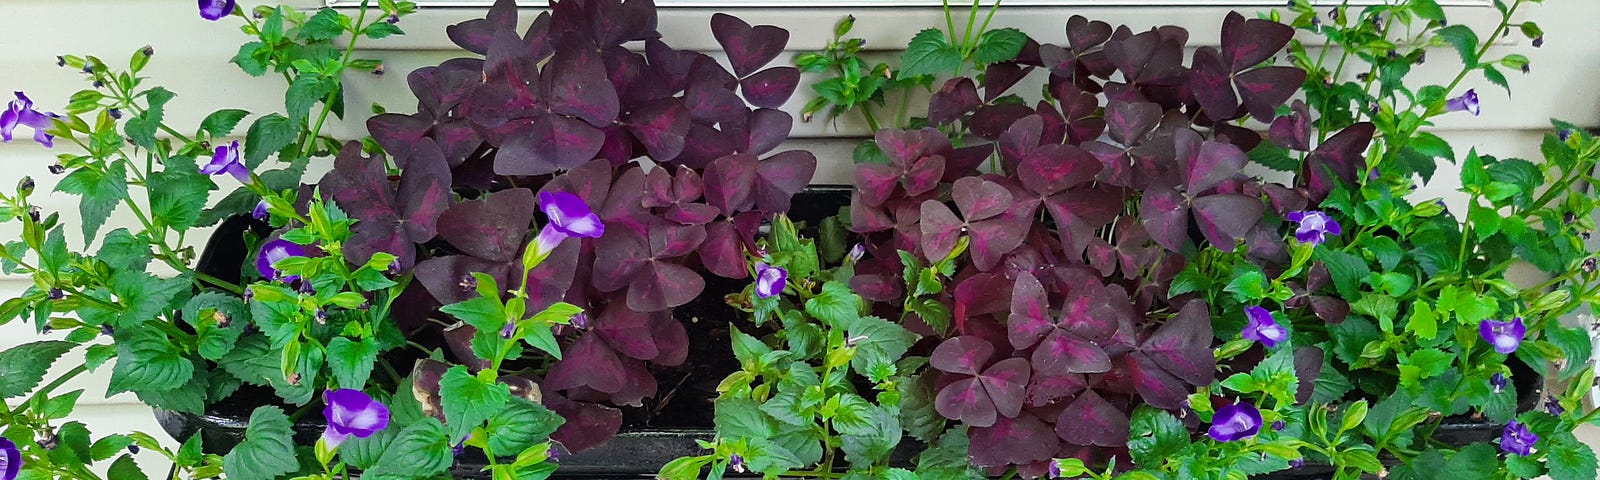 window box filled with purple shamrocks and bellflowers.